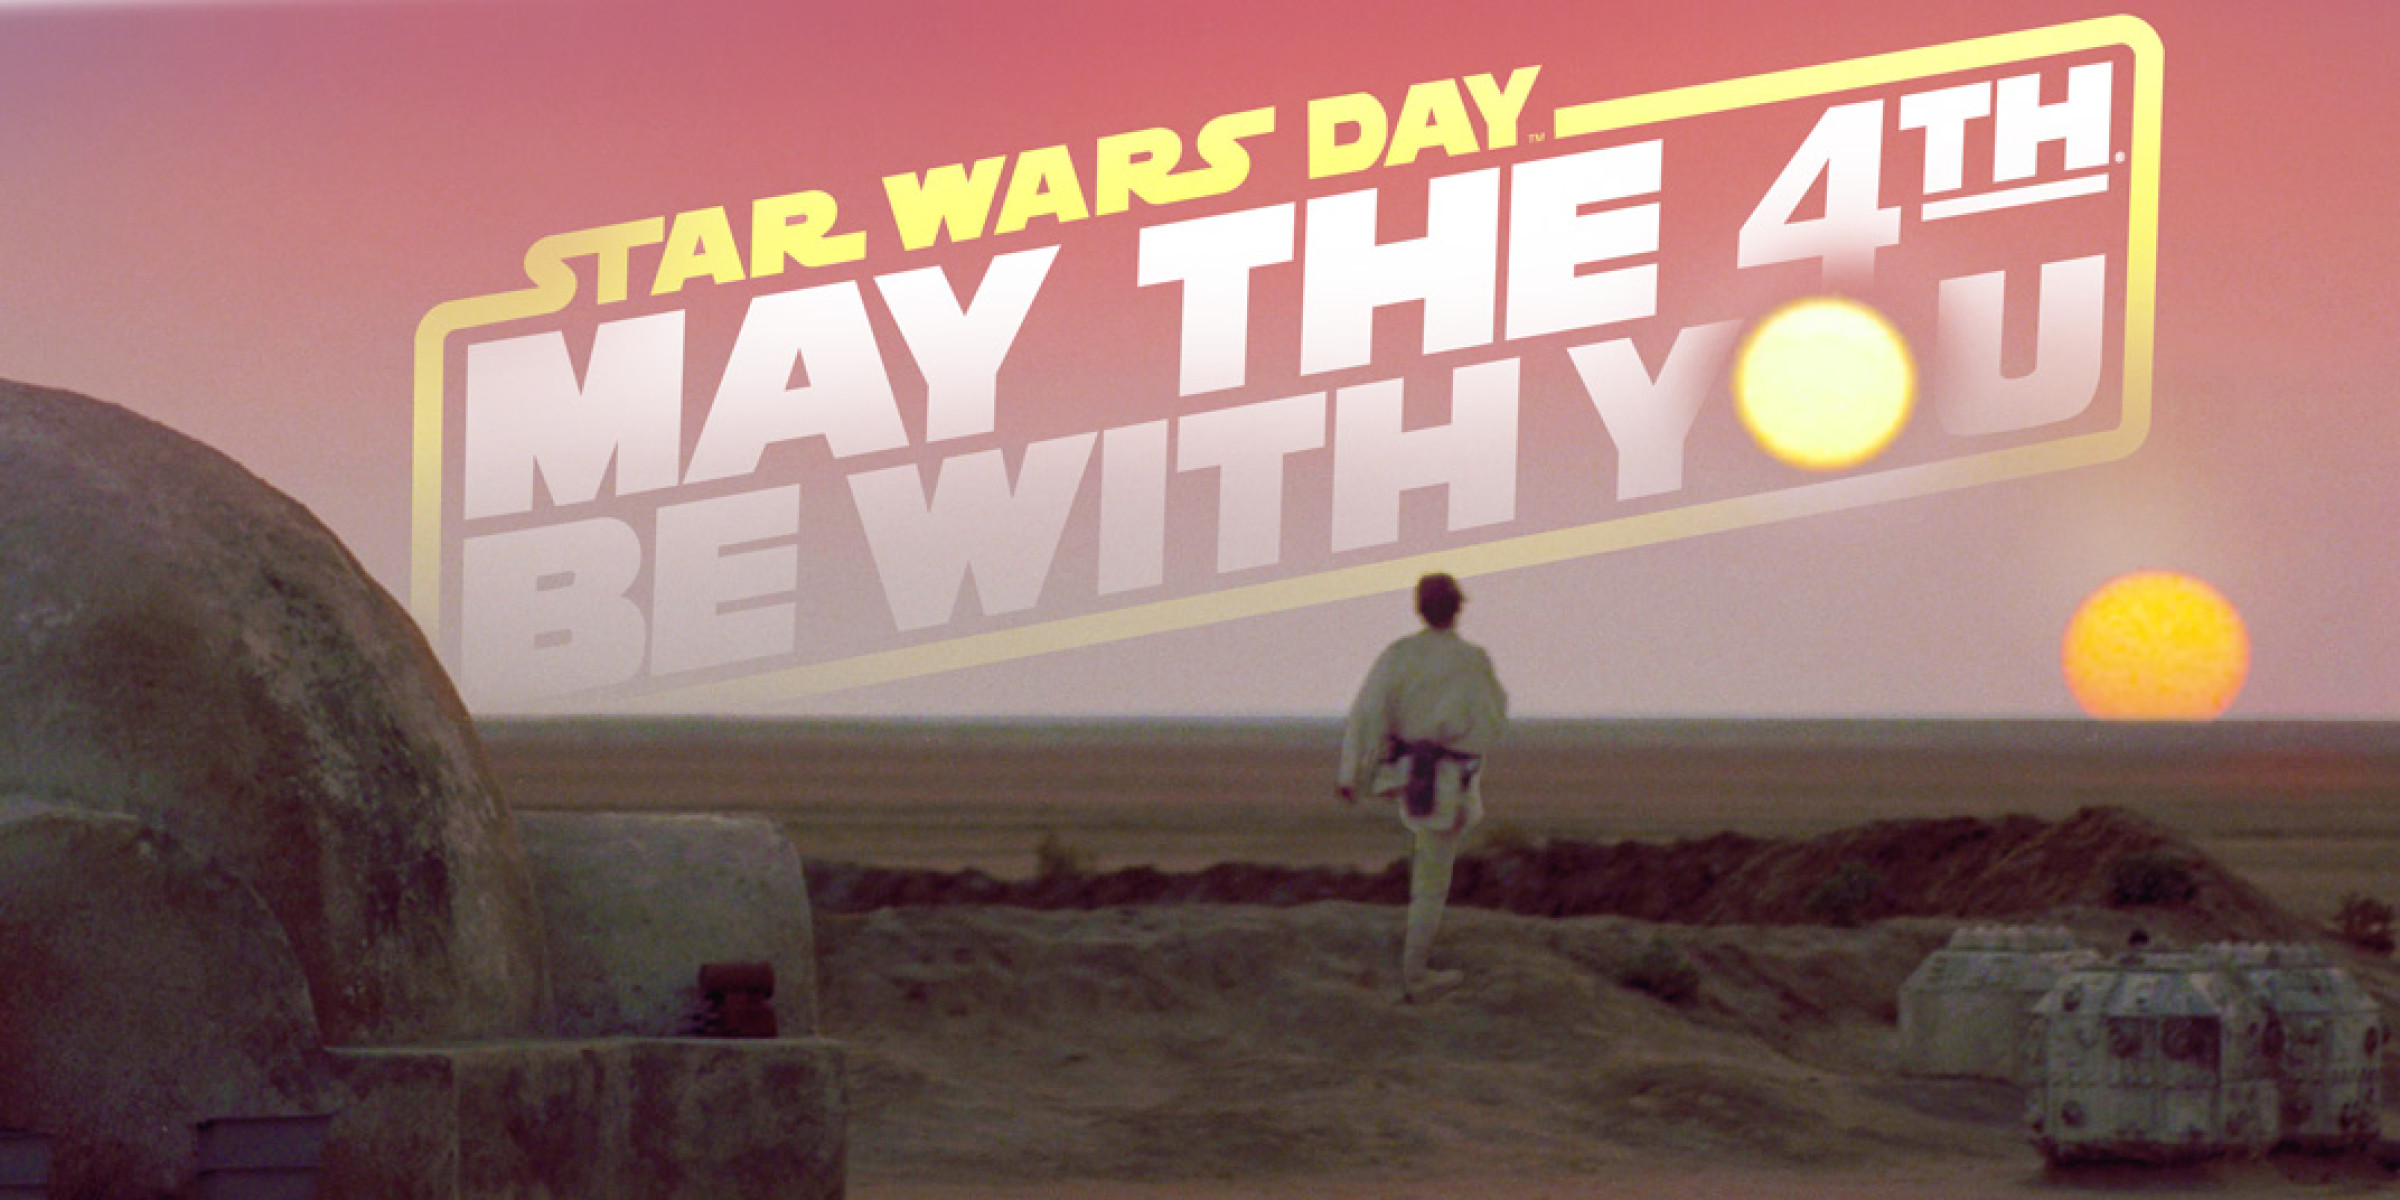 “May The 4th Be With You”: A Plethora Of Posters By The Poster Posse May The 4th Be With You Wallpaper